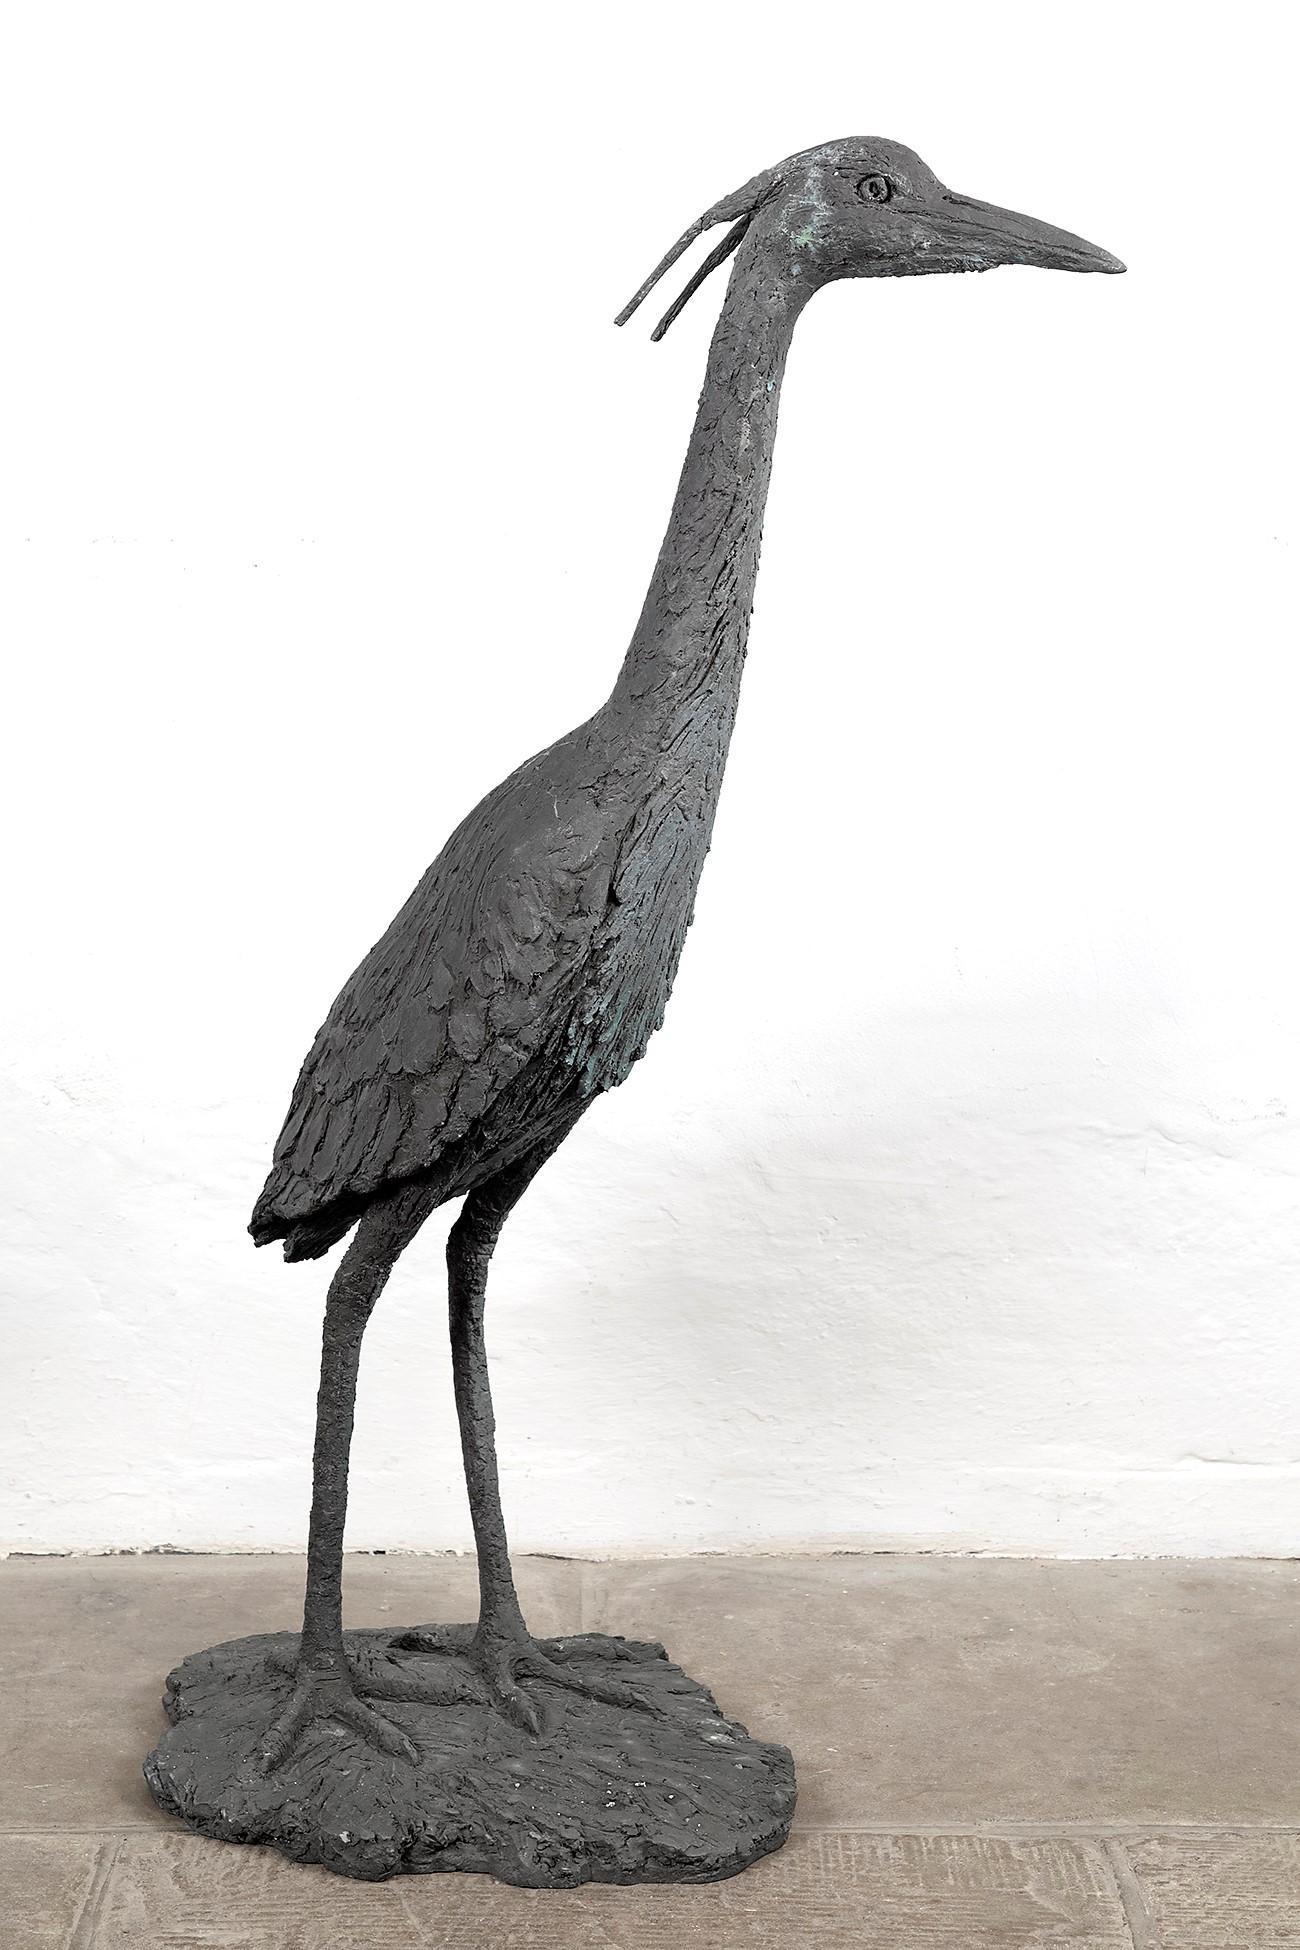 The graceful ‘Heron II’ by internationally renowned sculptor Marion Smith. Lifesized and made of bronze resin with signature and initials of Marion Smith to the base. Marion’s works are rarely available to the public with most being held in private